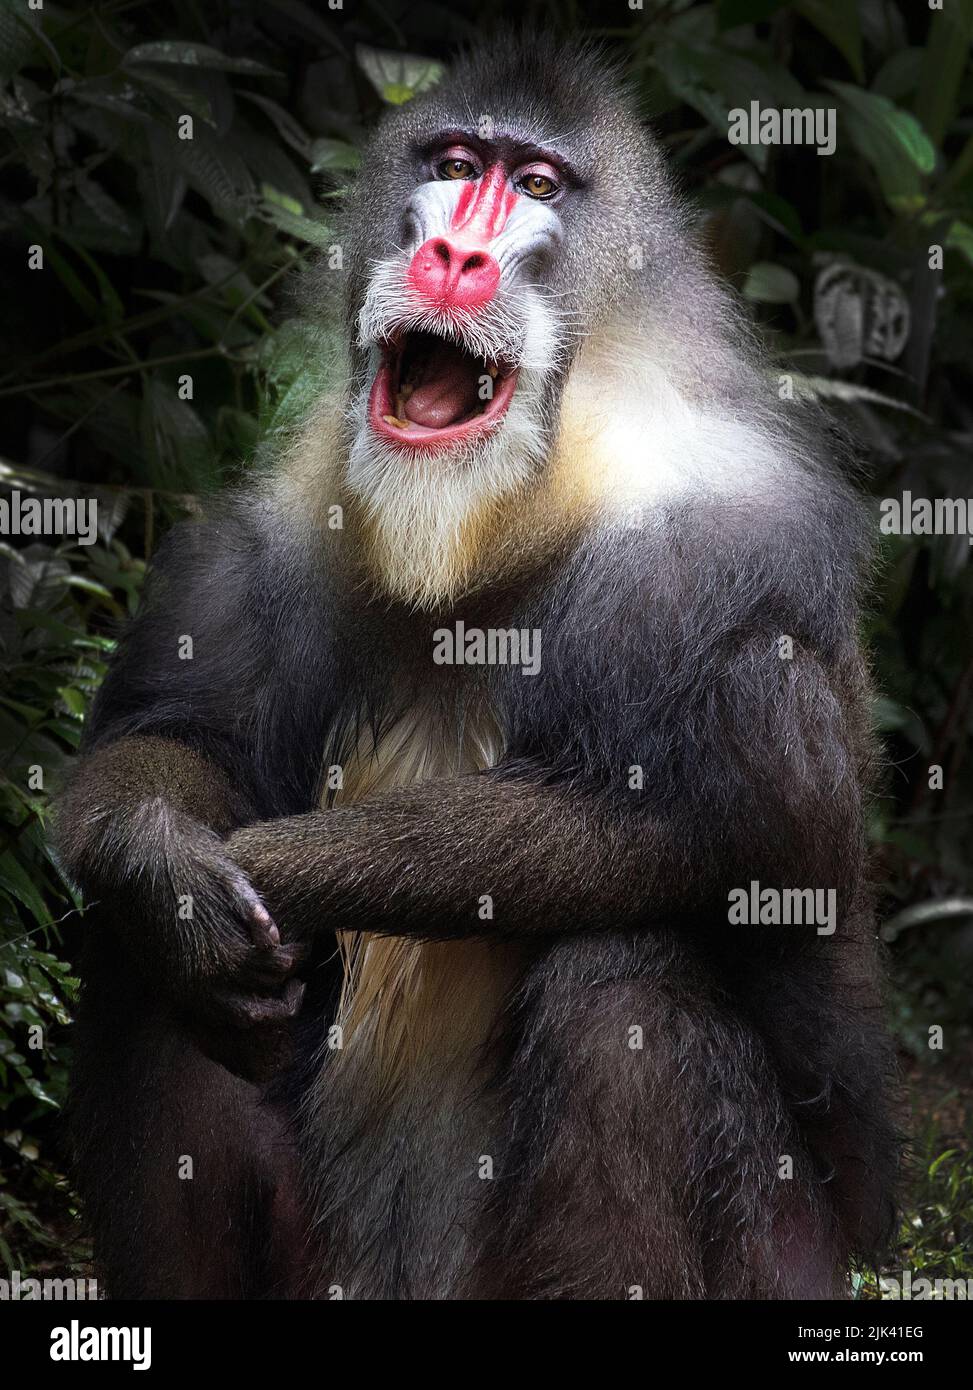 Baboon with open mouth and colorful red face Stock Photo